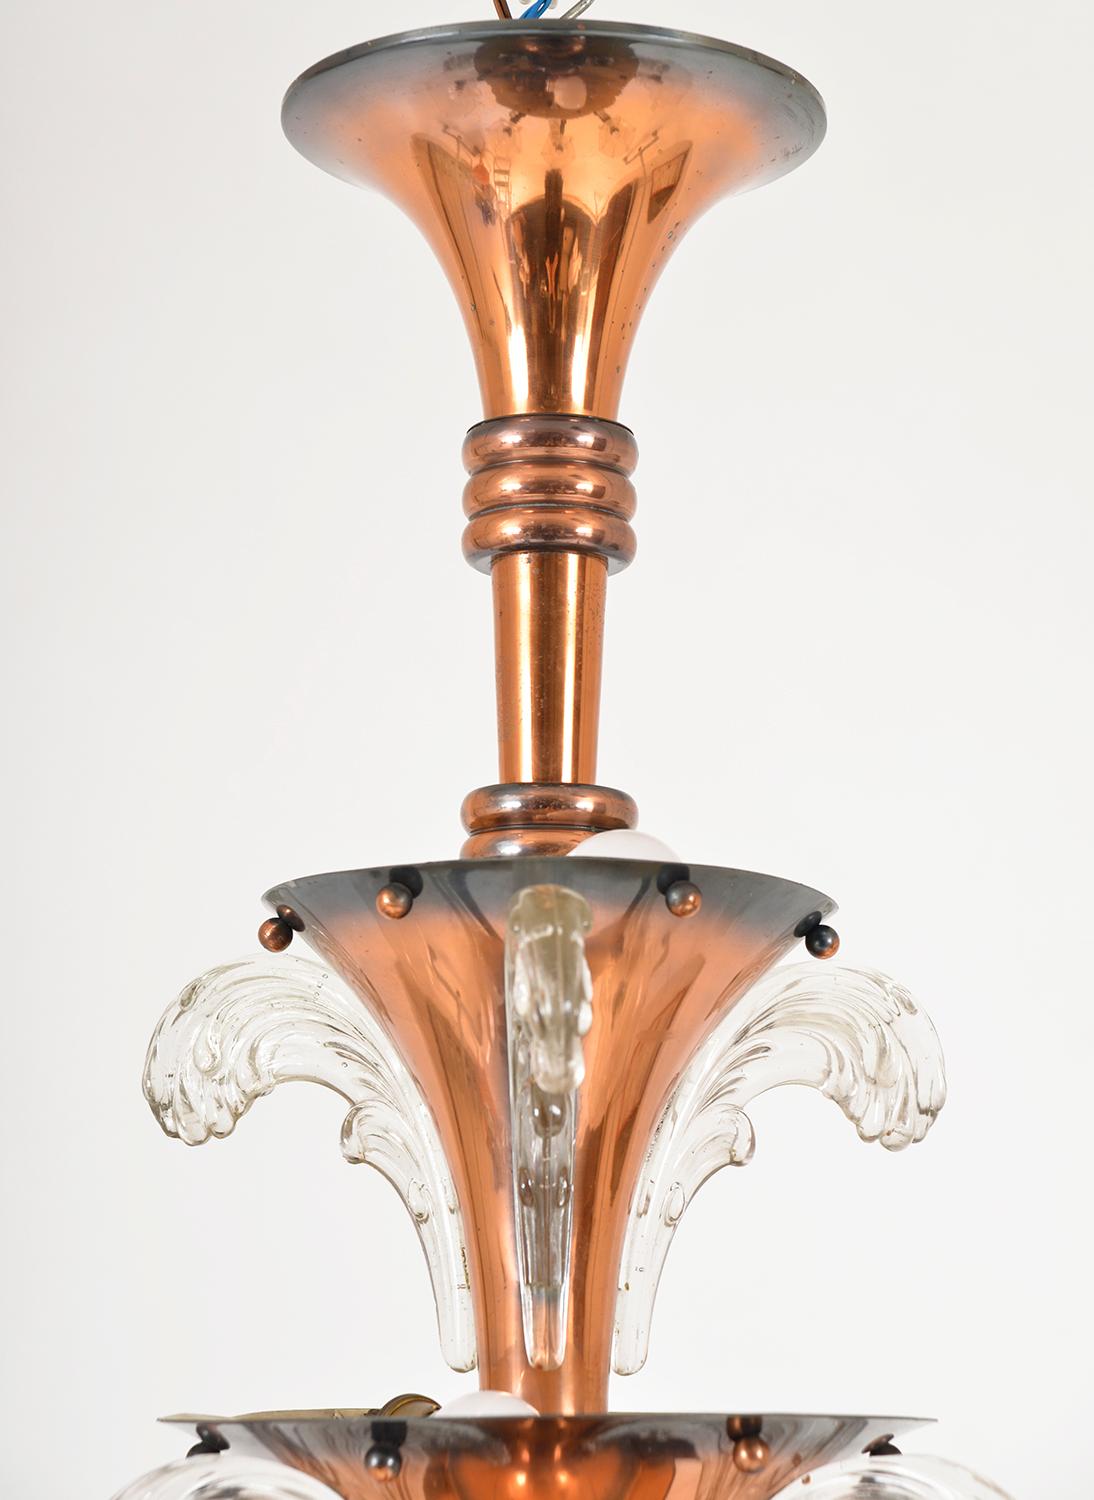 1930s French Art Deco 6-Arm Chandelier by Petitot and Ezan Copper and Glass In Good Condition For Sale In Sherborne, Dorset